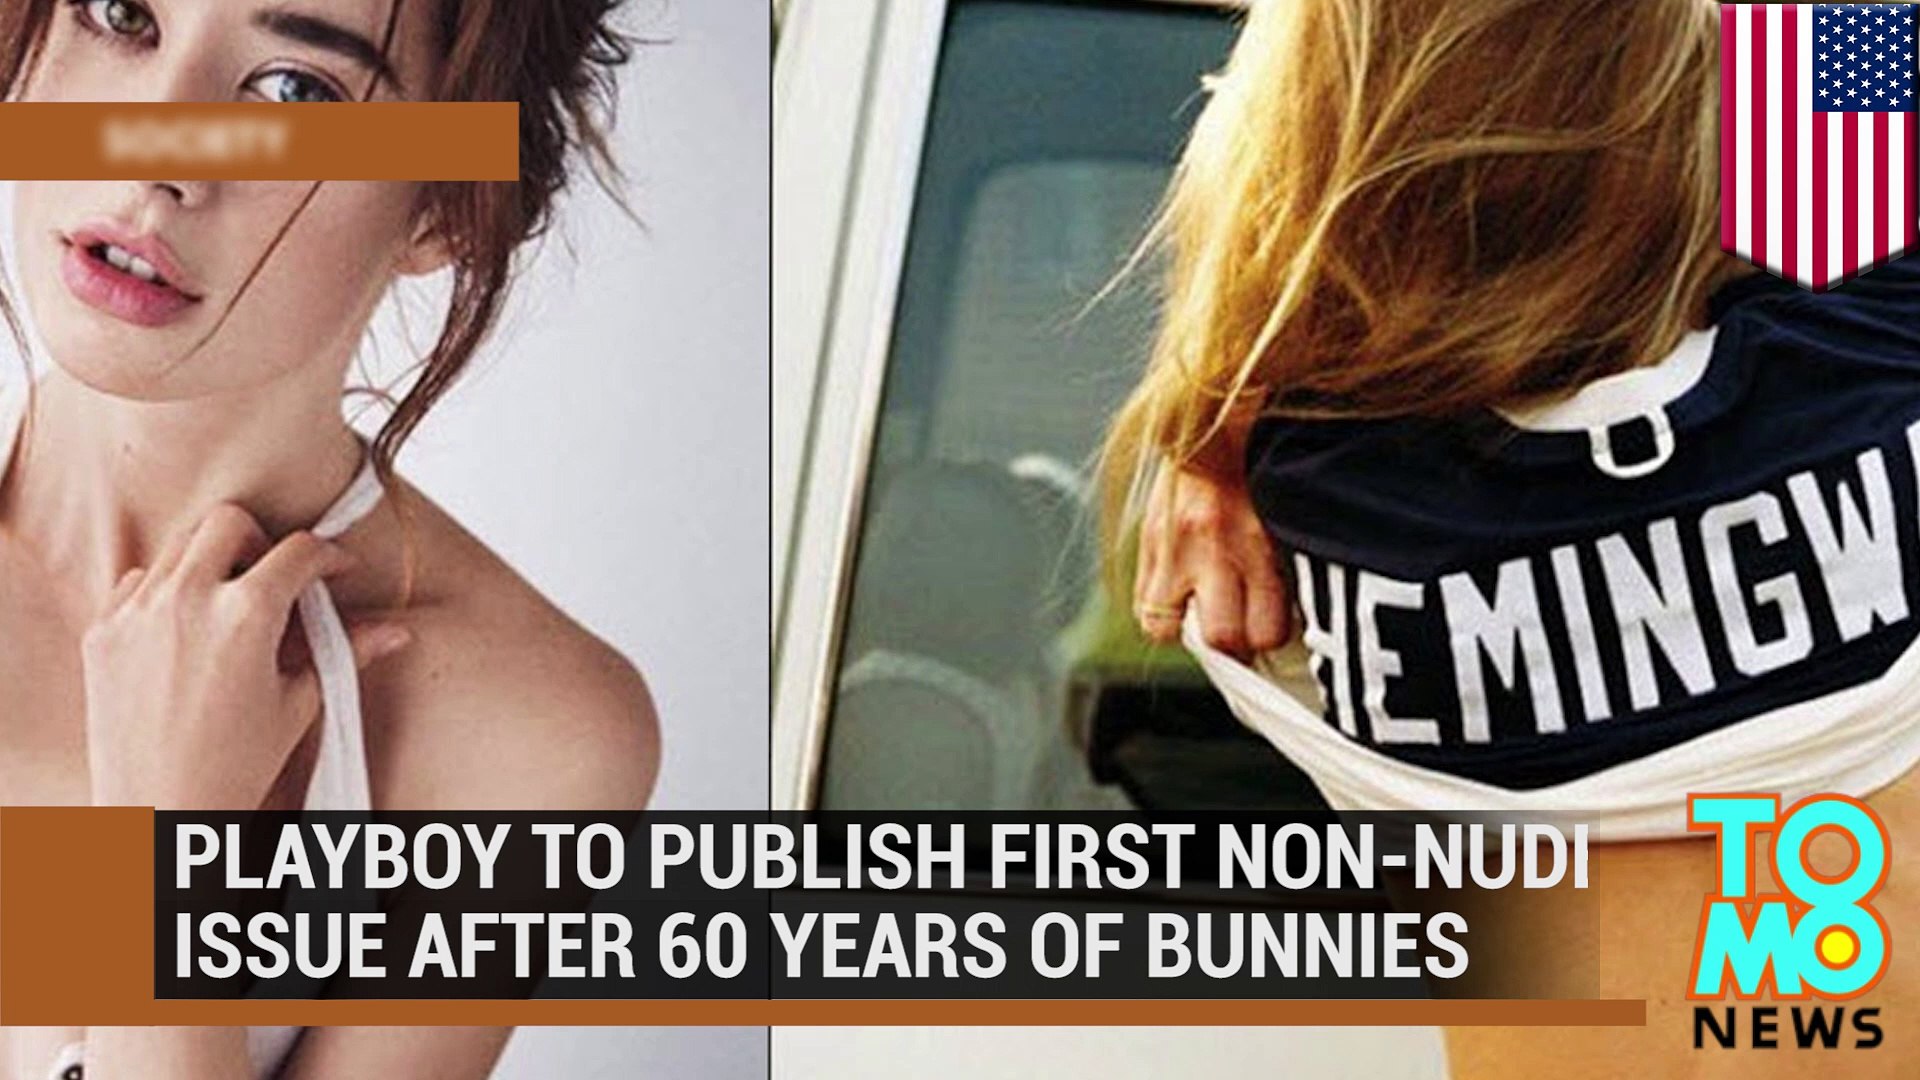 Playboy magazine publishes first non-nude issue ever with Snapchat-style centerfold photo